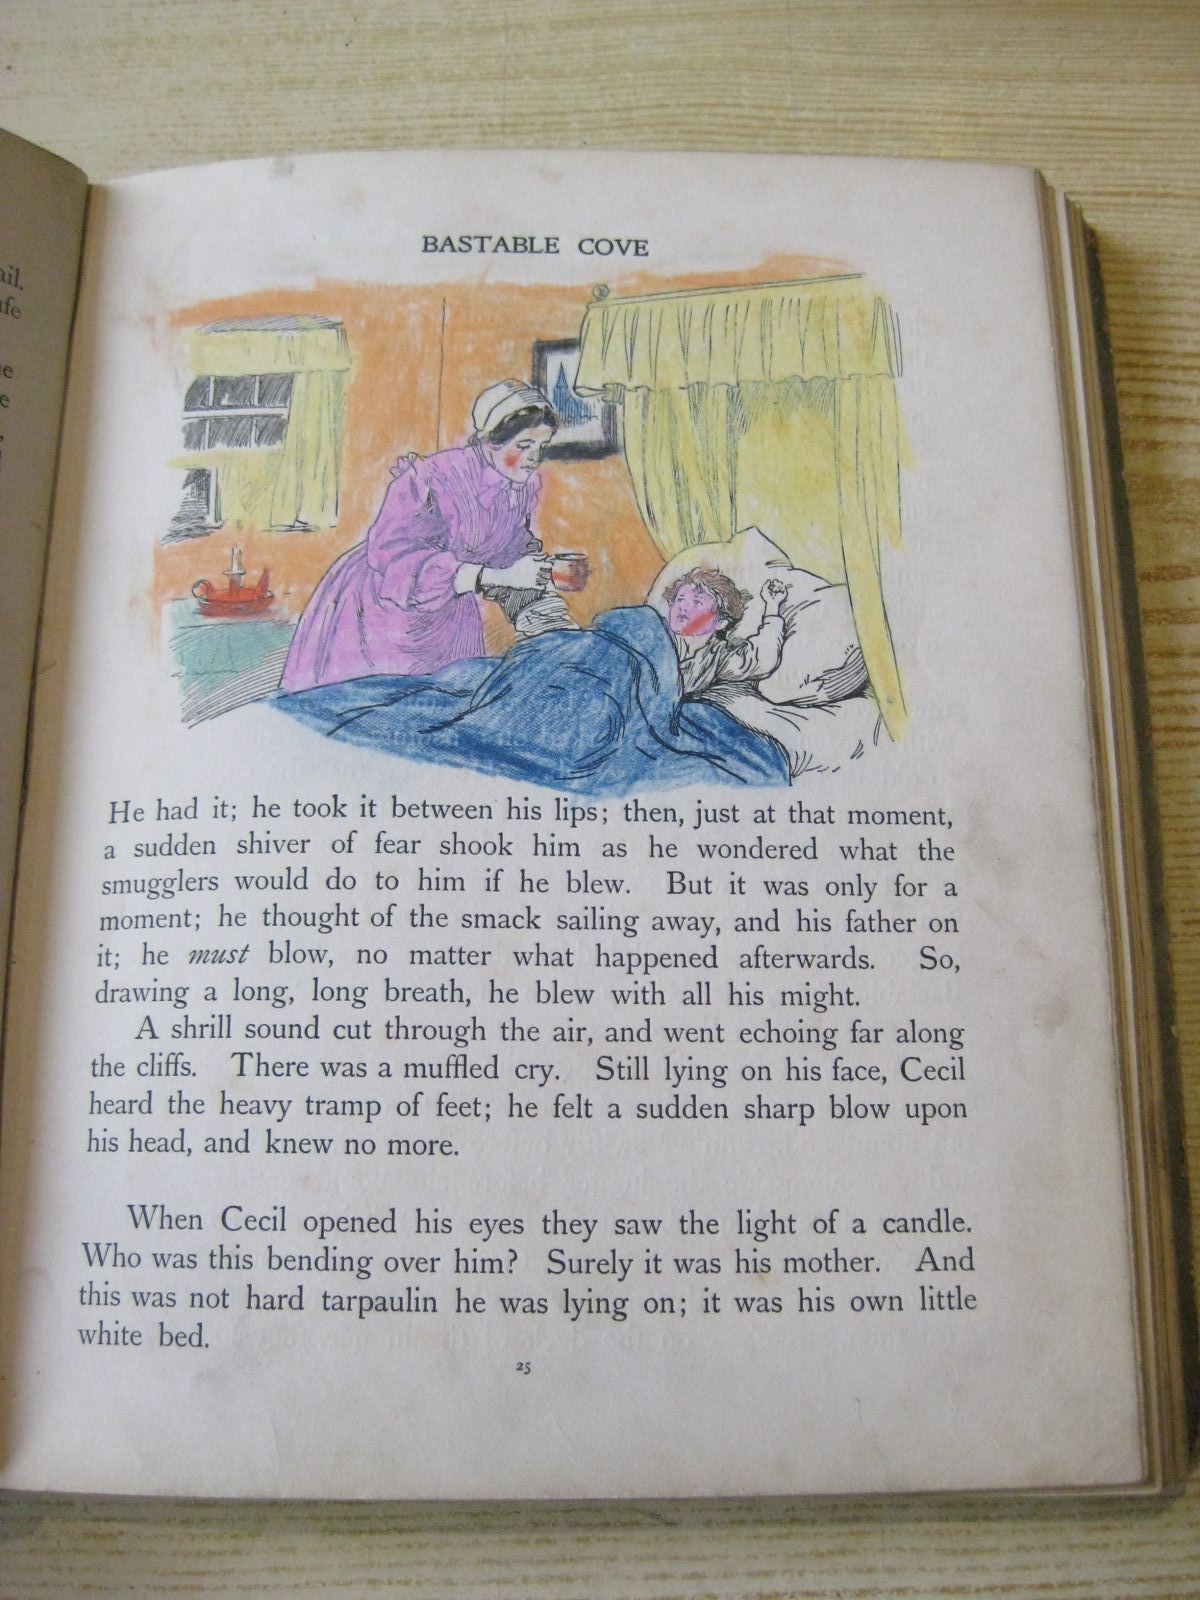 Photo of BLACKIE'S CHILDREN'S ANNUAL 3RD YEAR written by Strang, Herbert
Bingham, Clifton
Herbertson, Agnes Grozier
Morris, Alice Talwin illustrated by Robinson, Charles
Hassall, John published by Blackie & Son Ltd. (STOCK CODE: 1405424)  for sale by Stella & Rose's Books